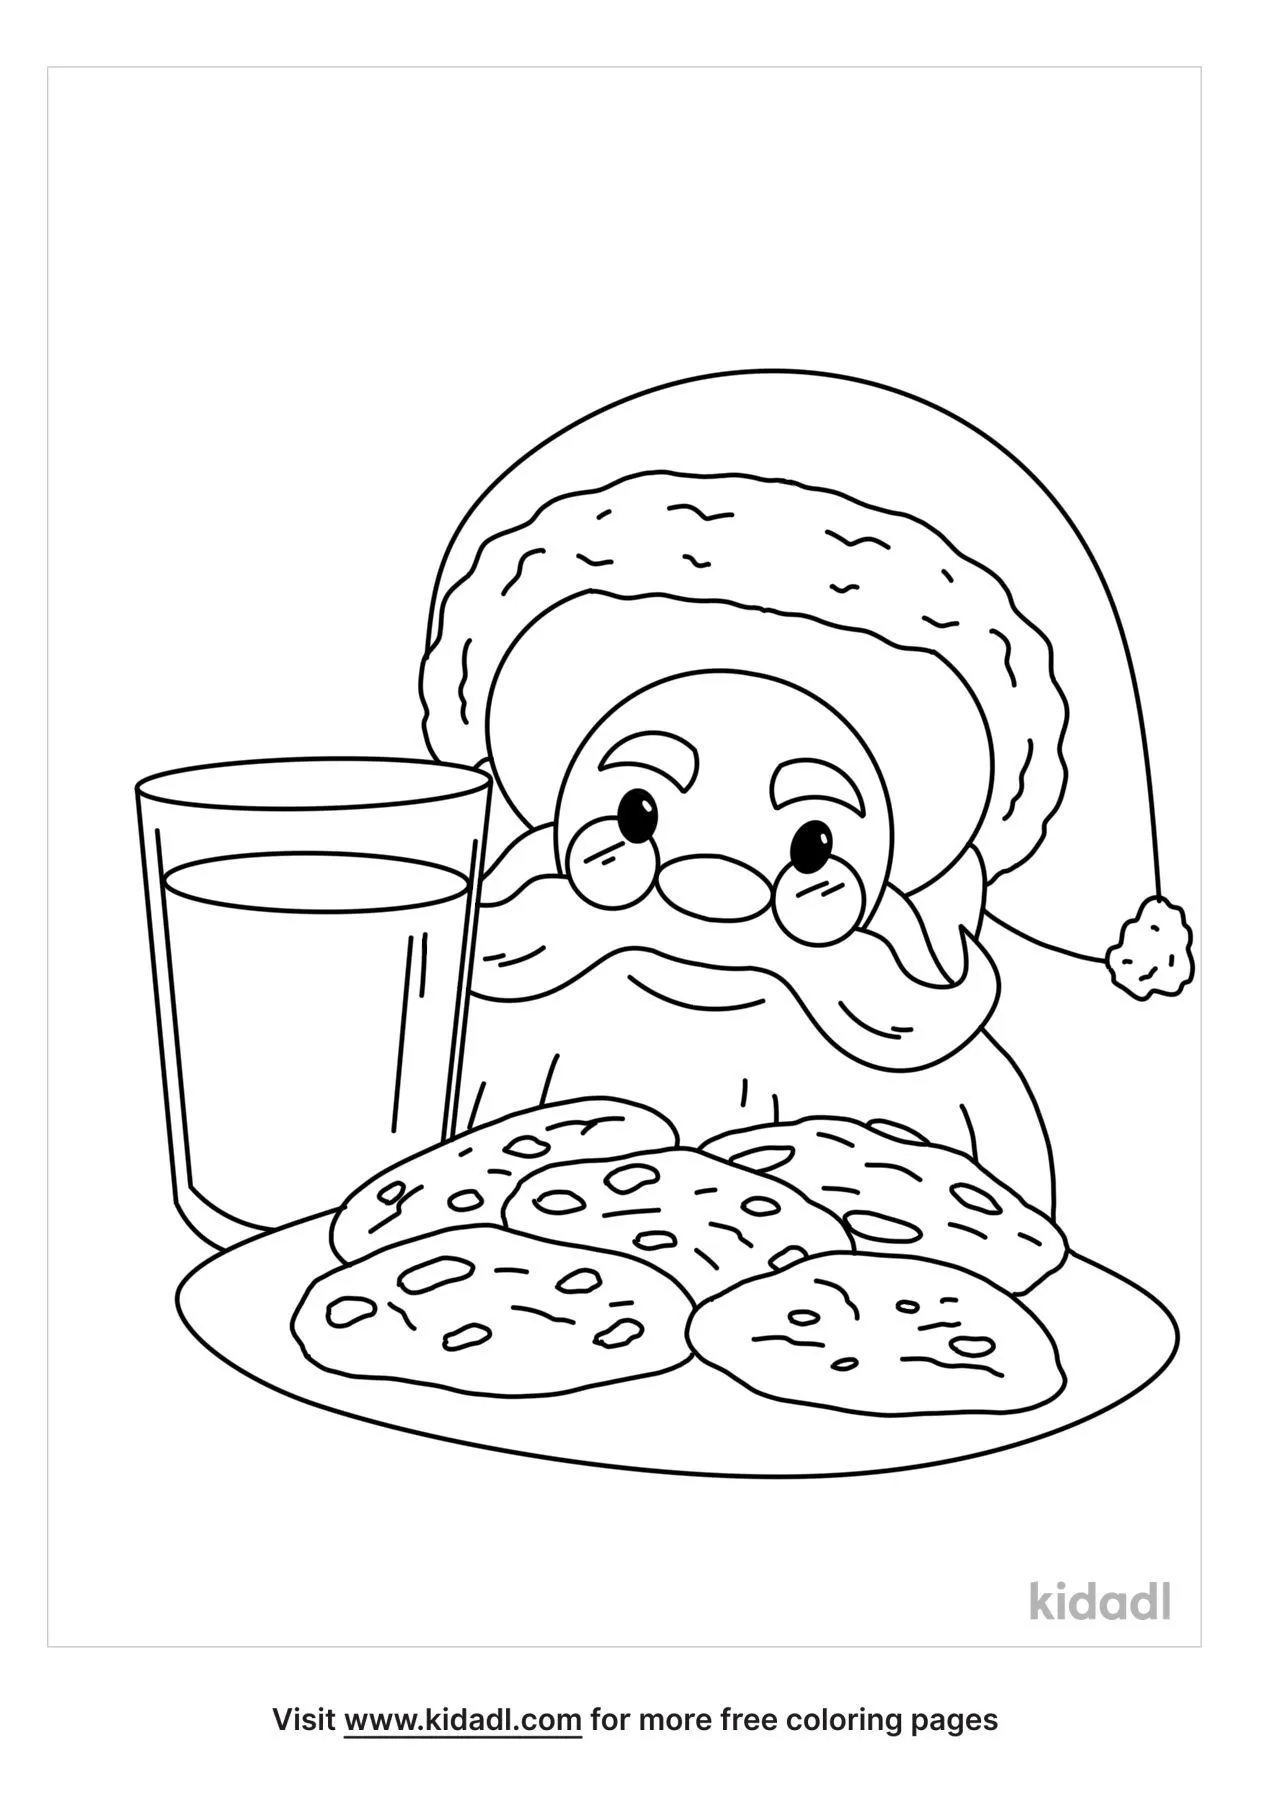 Santa With Cookies And Milk Coloring Page